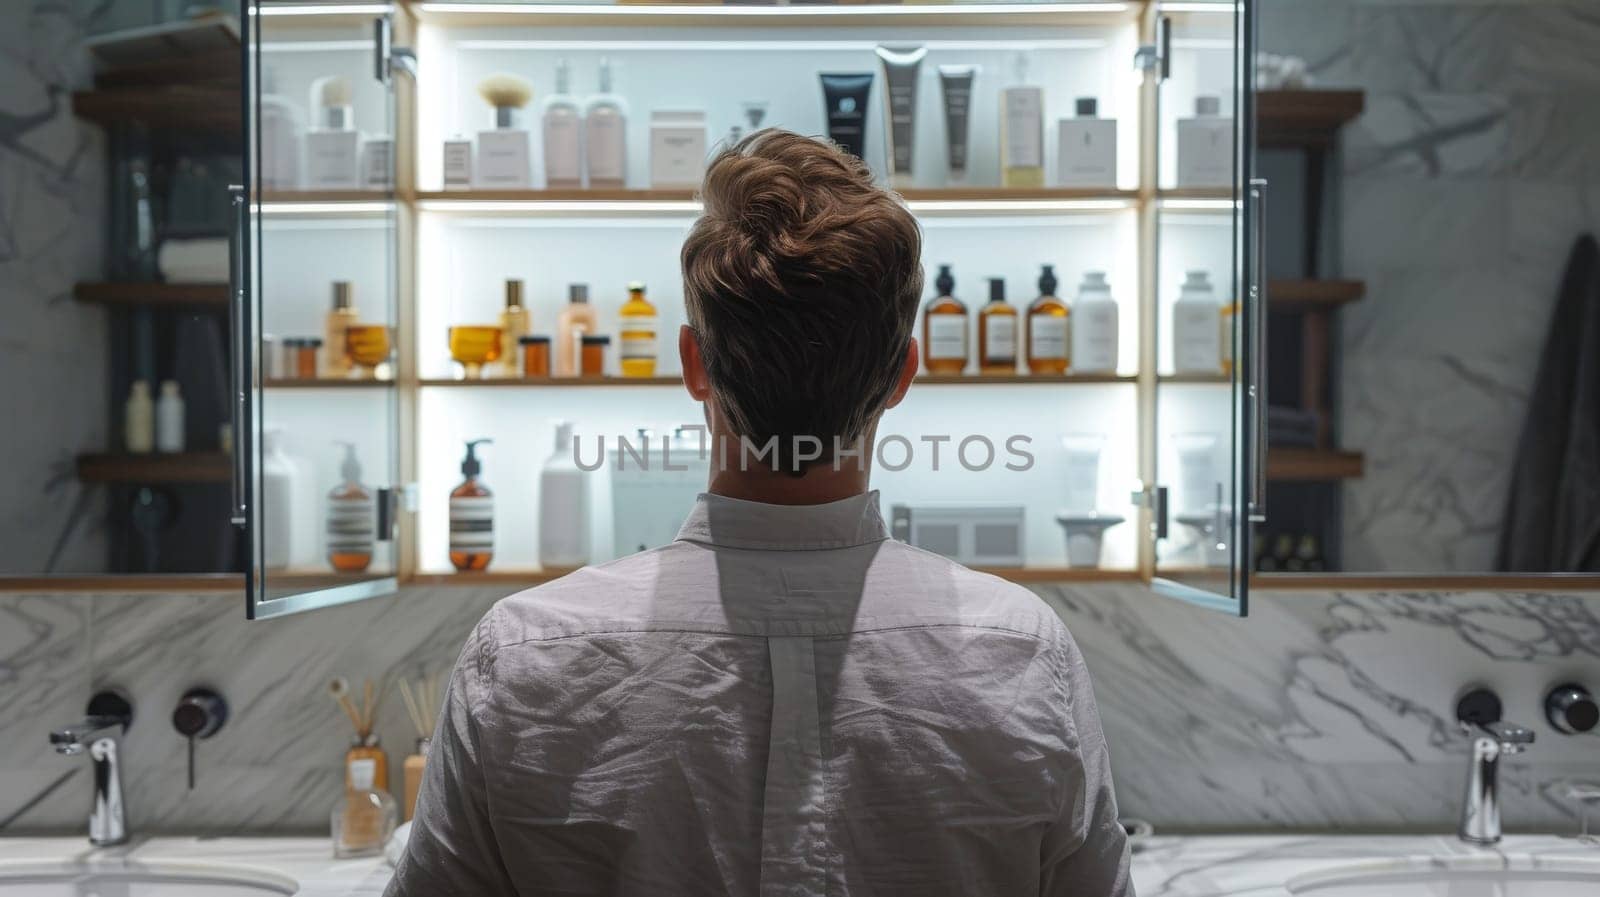 A man is looking at a shelf full of toiletries by itchaznong